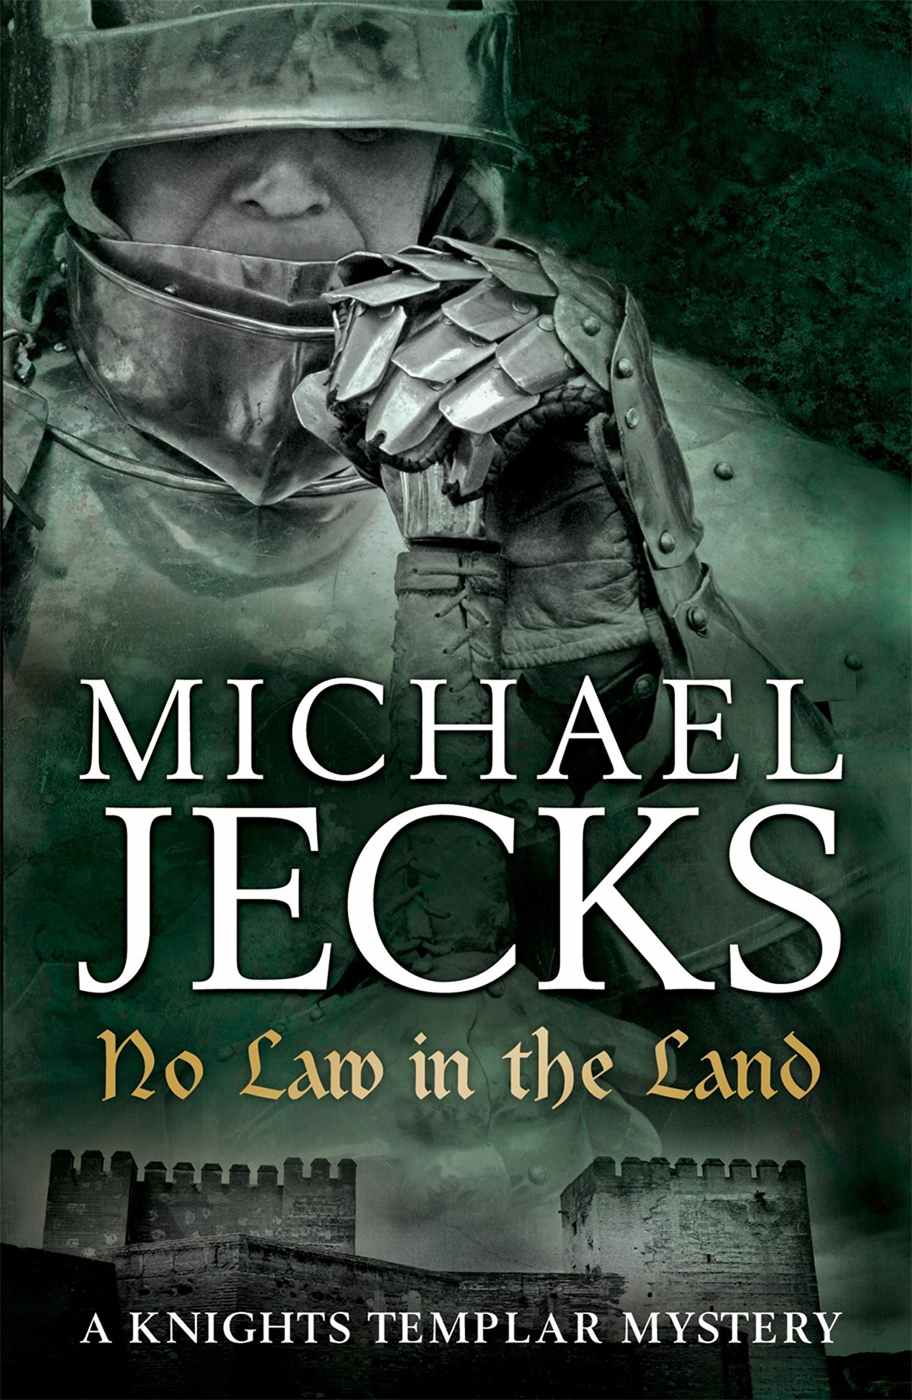 No Law in the Land: (Knights Templar 27) by Michael Jecks